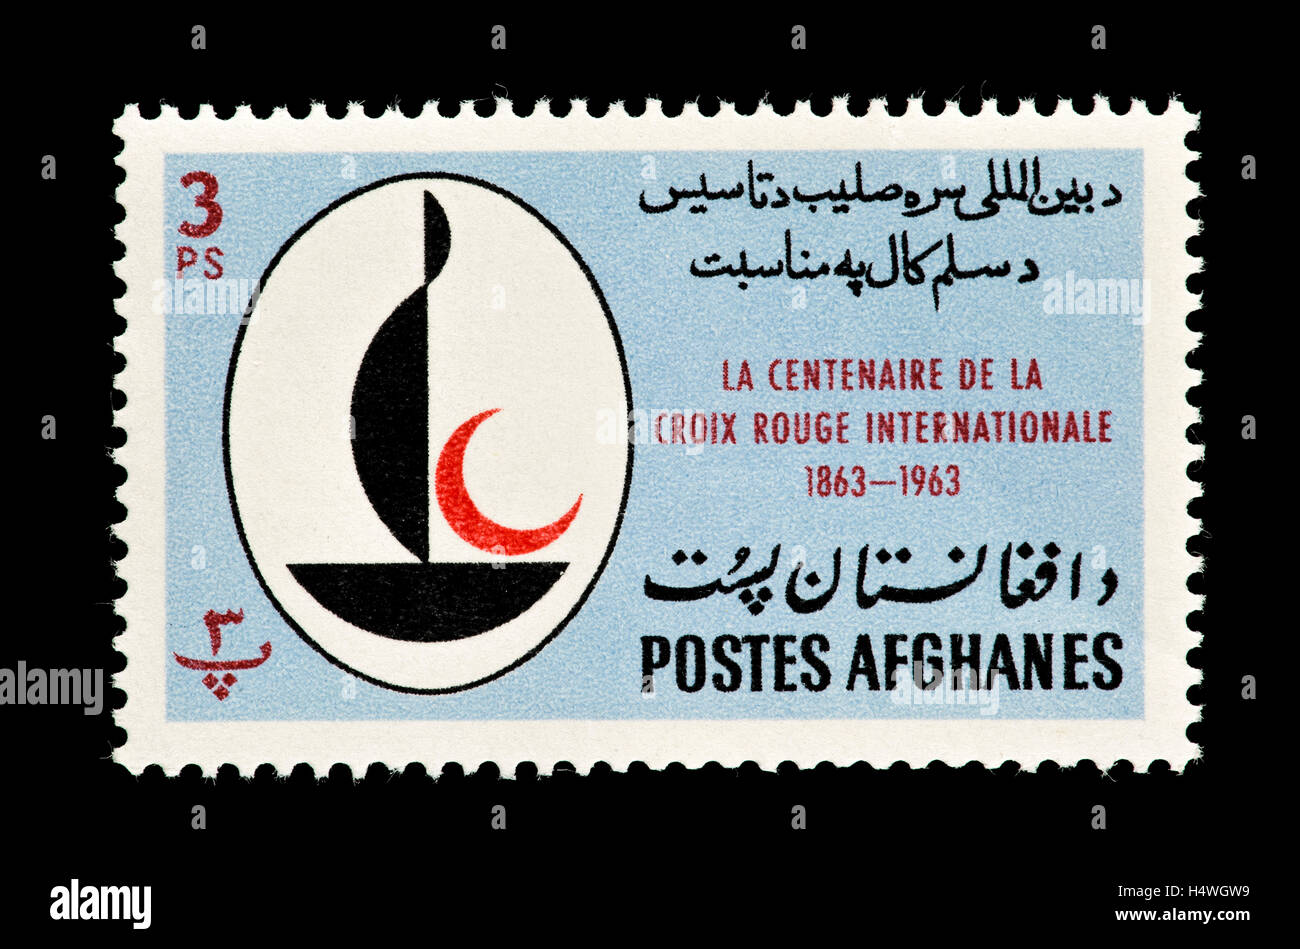 Postage stamp from Afghanistan depicting a lamp, centennial of the International Red Cross. Stock Photo